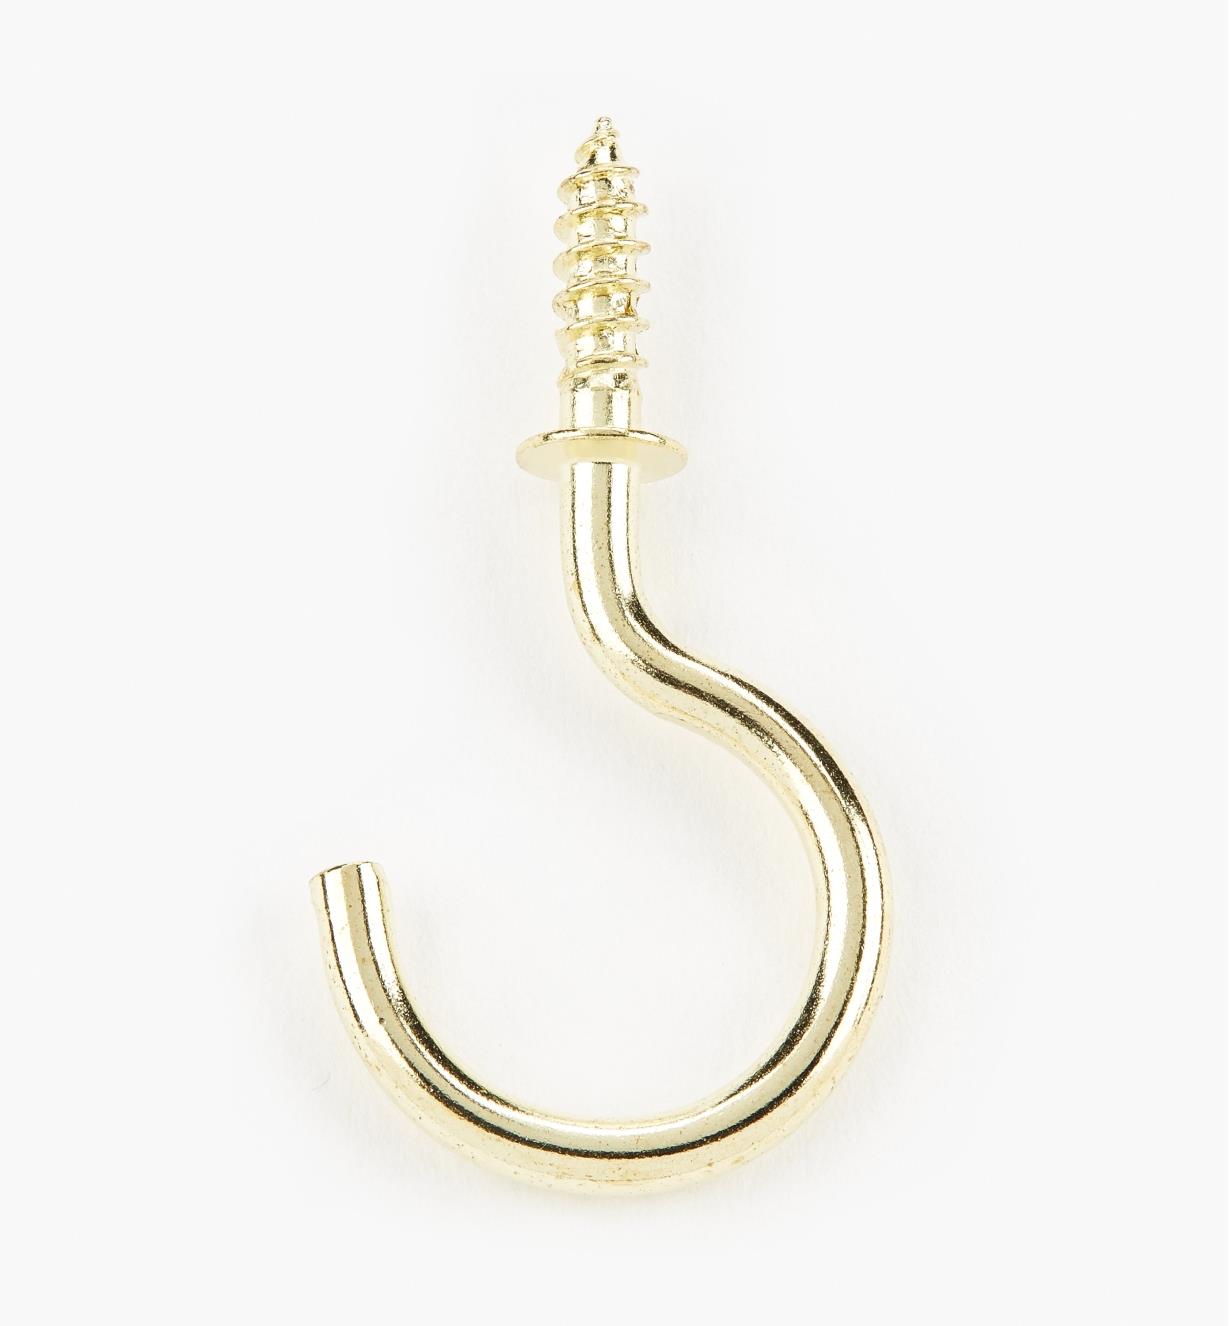 00S5623 - 1" Brass-Plated Cup Hooks (100)